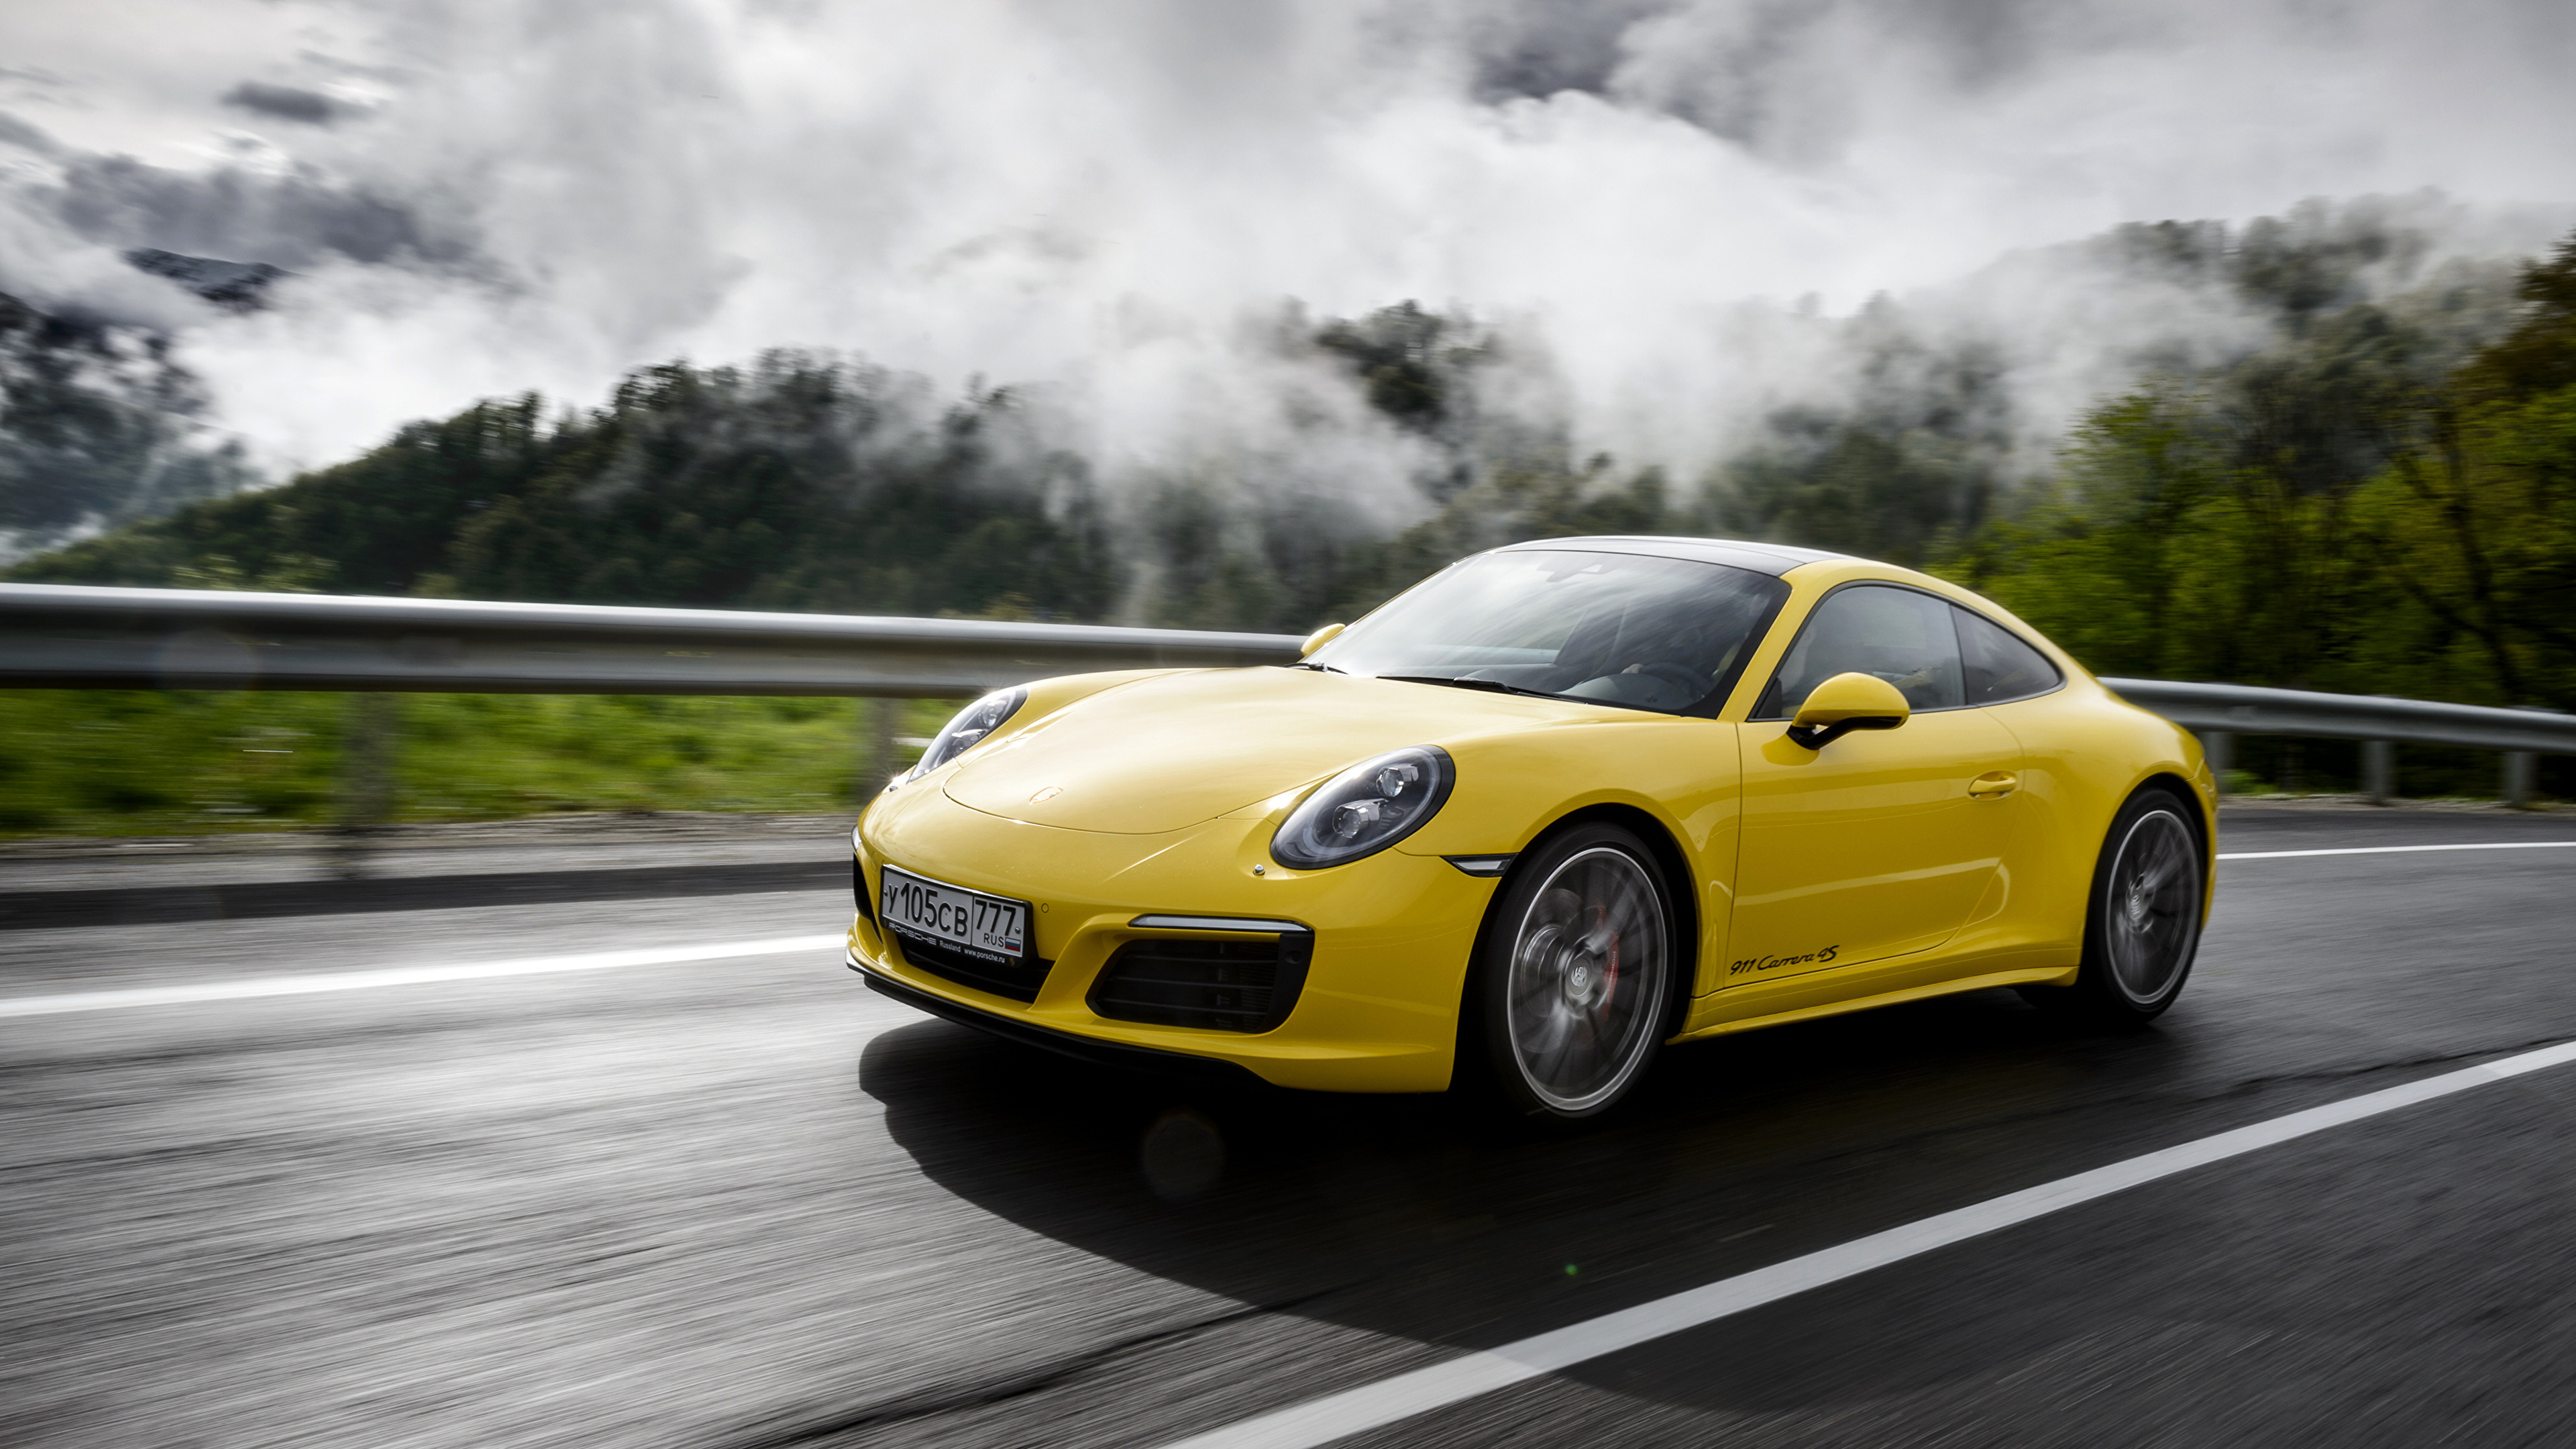 Yellow Porsche 911 on Road During Daytime. Wallpaper in 3840x2160 Resolution